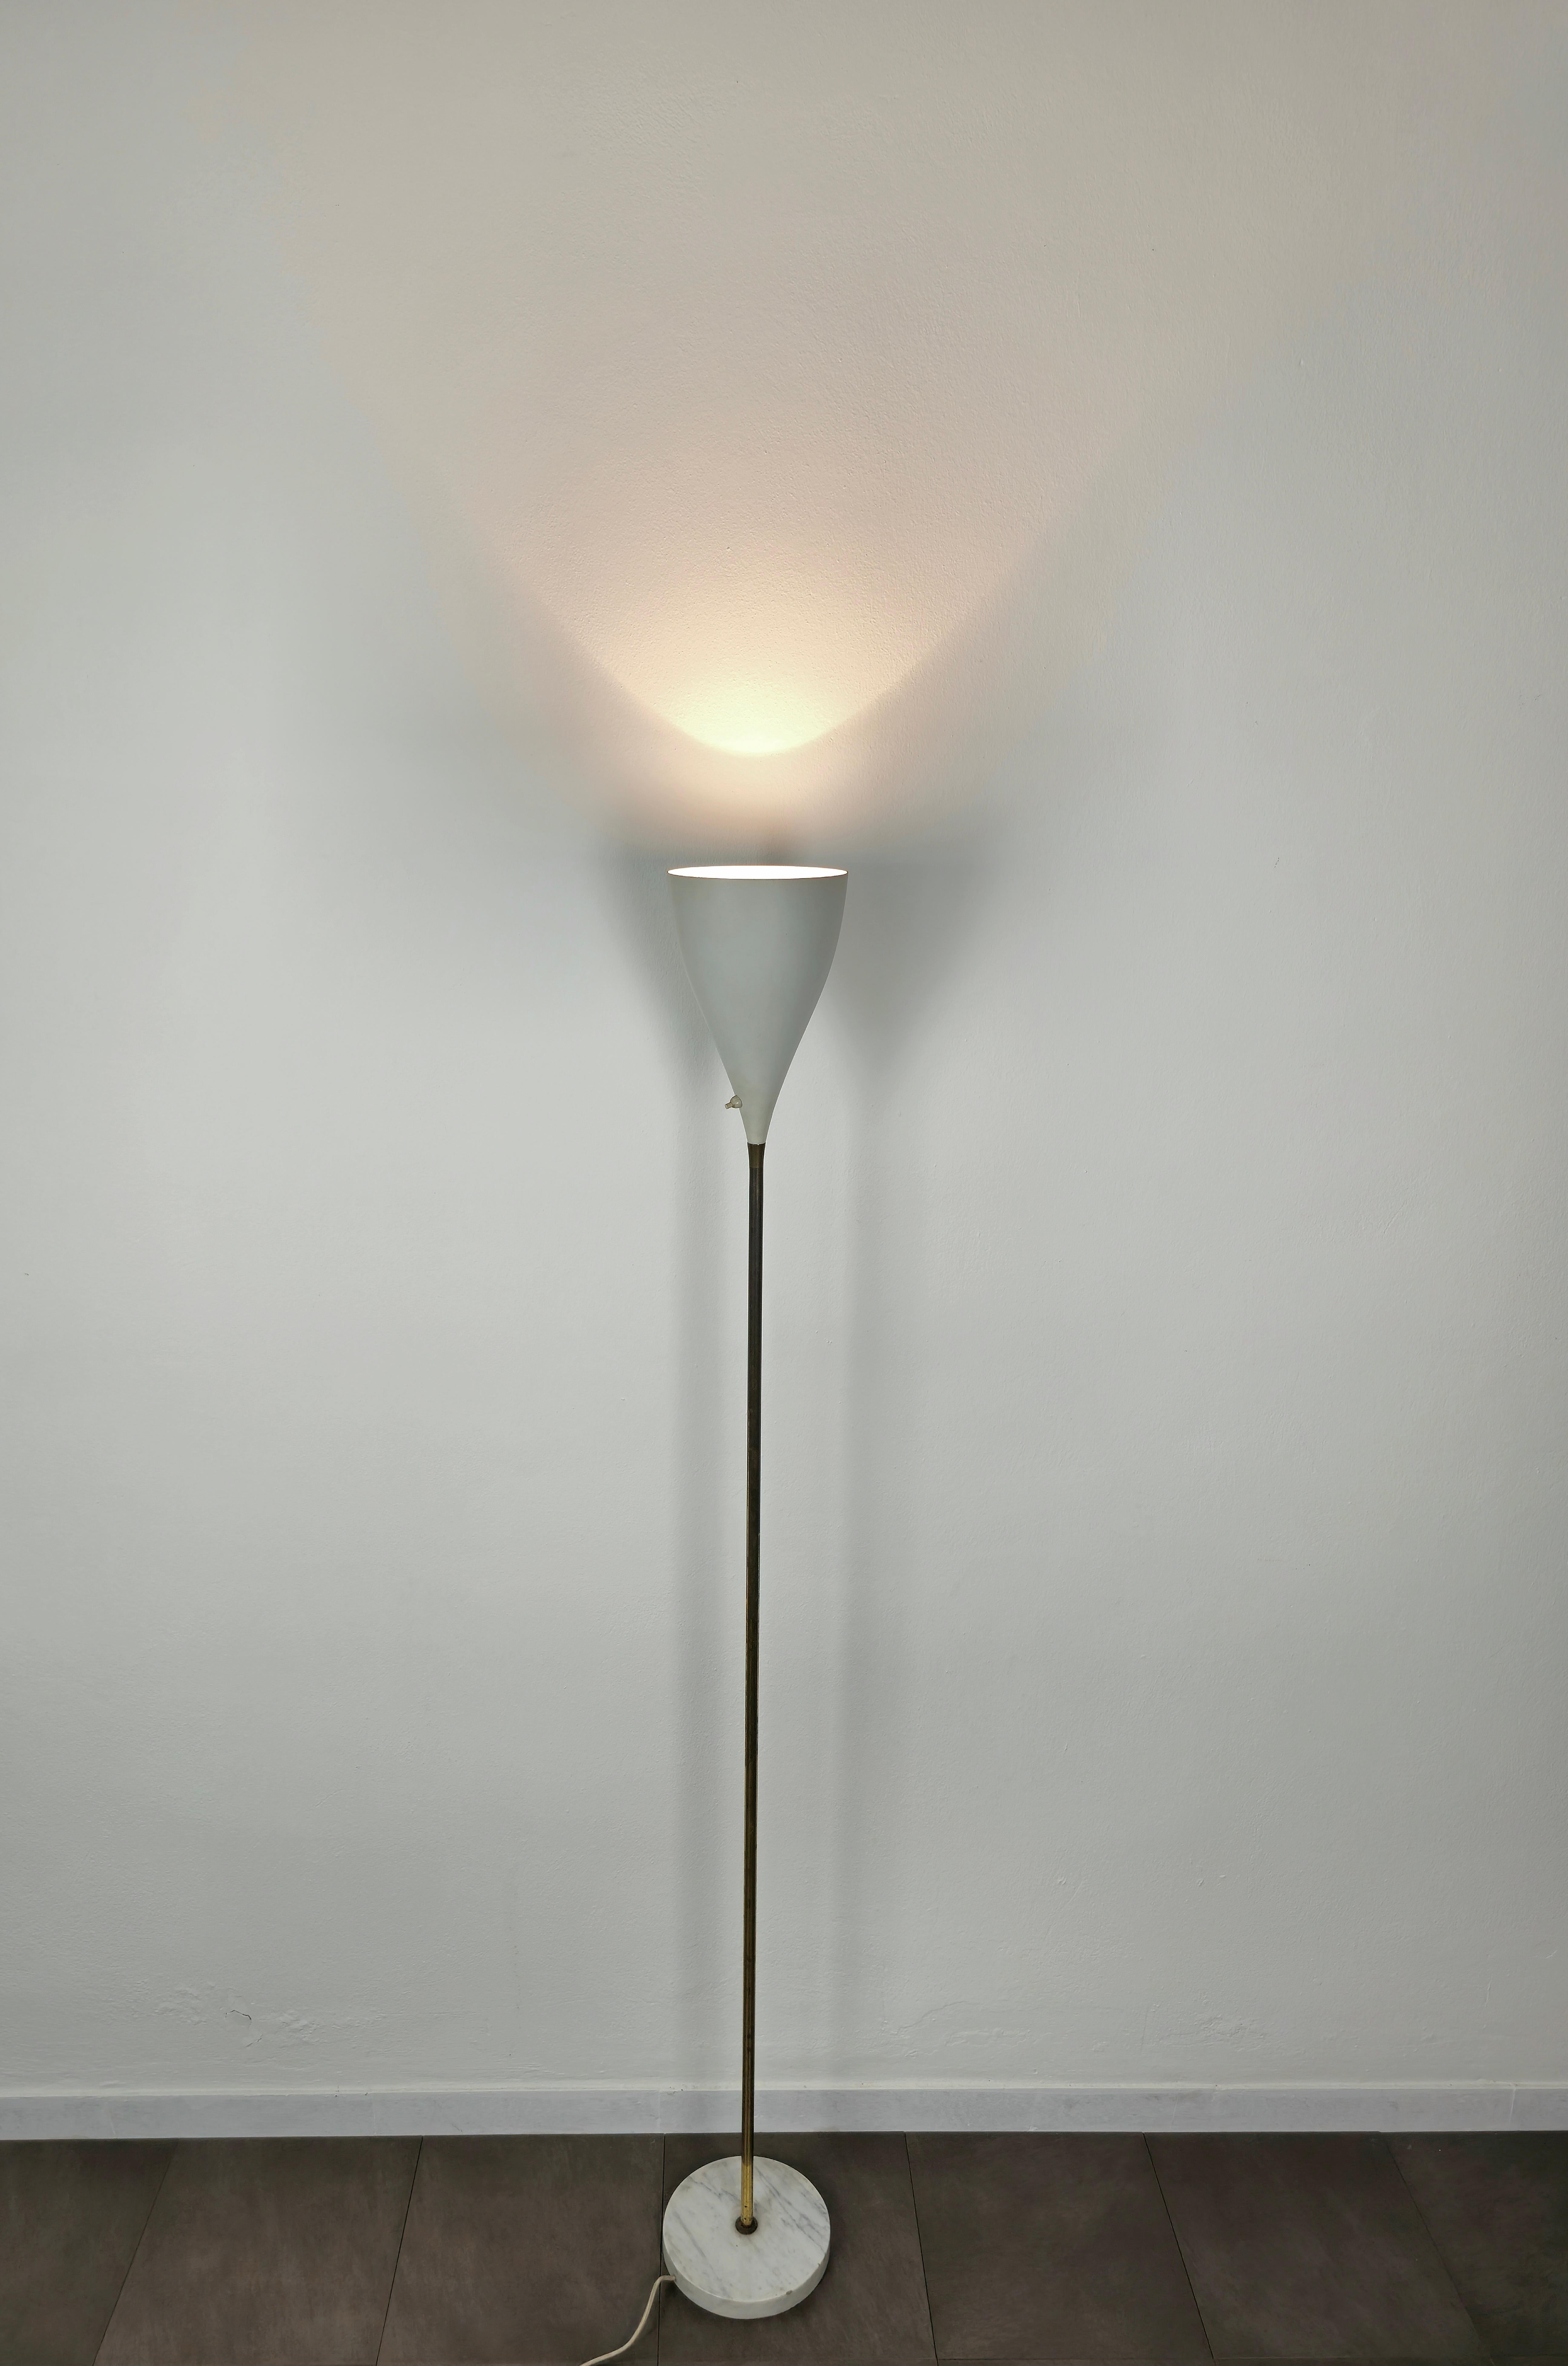 Rare and elegant floor lamp with 1 E27 light produced in Italy in the 1950s, attributed to Stilnovo.
The floor lamp was made with a circular base in white marble where a long brass stem stands with a conical-shaped diffuser in white enamelled